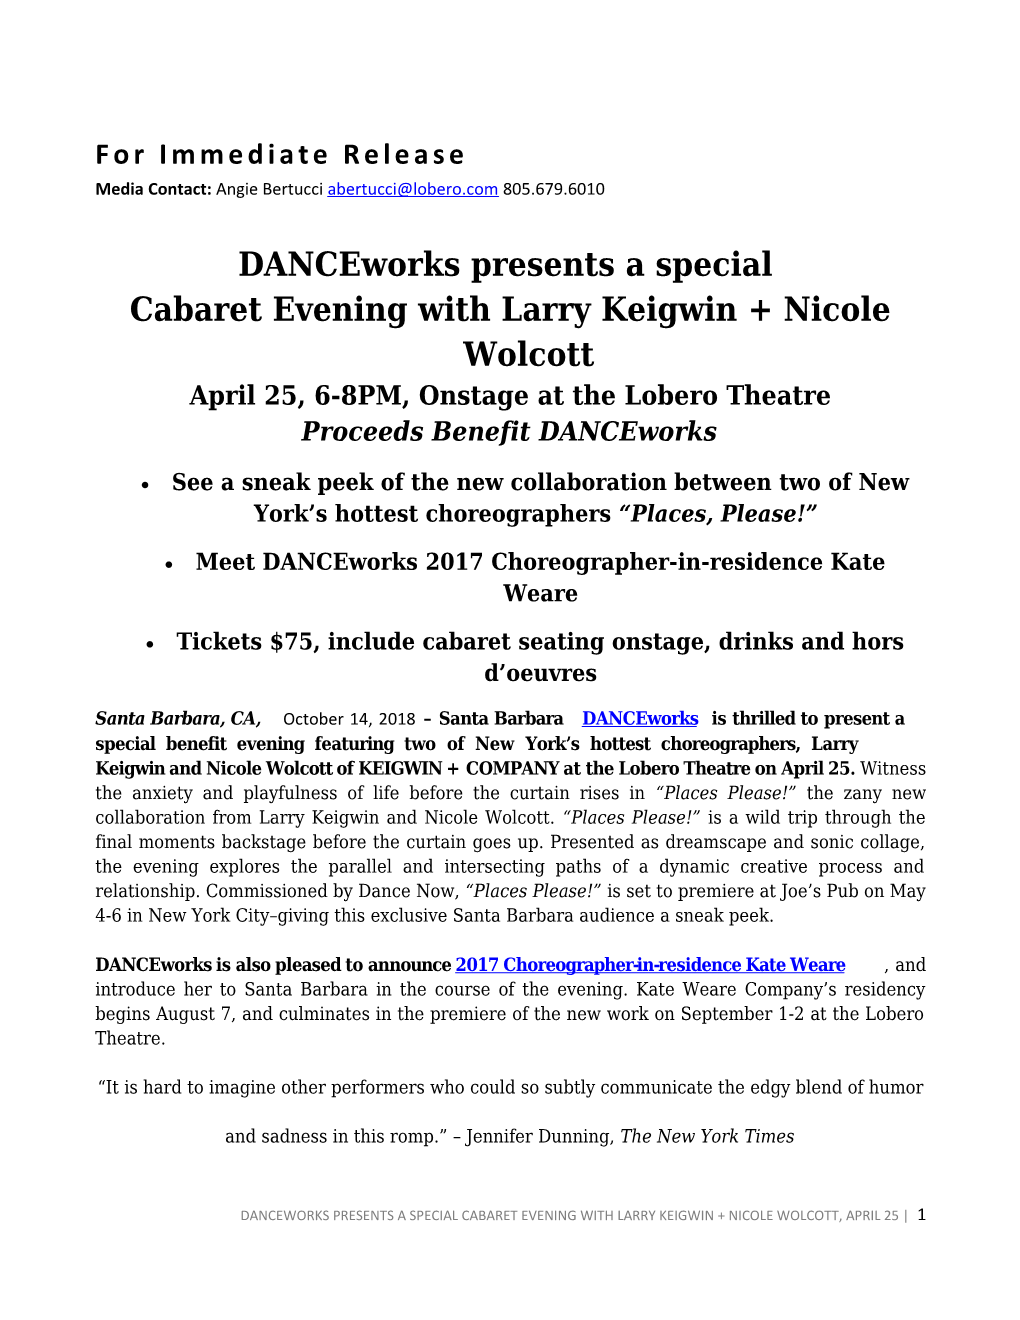 DANCEWORKS Presents a Special Cabaret Evening with Larry Keigwin + Nicole Wolcott, April 25